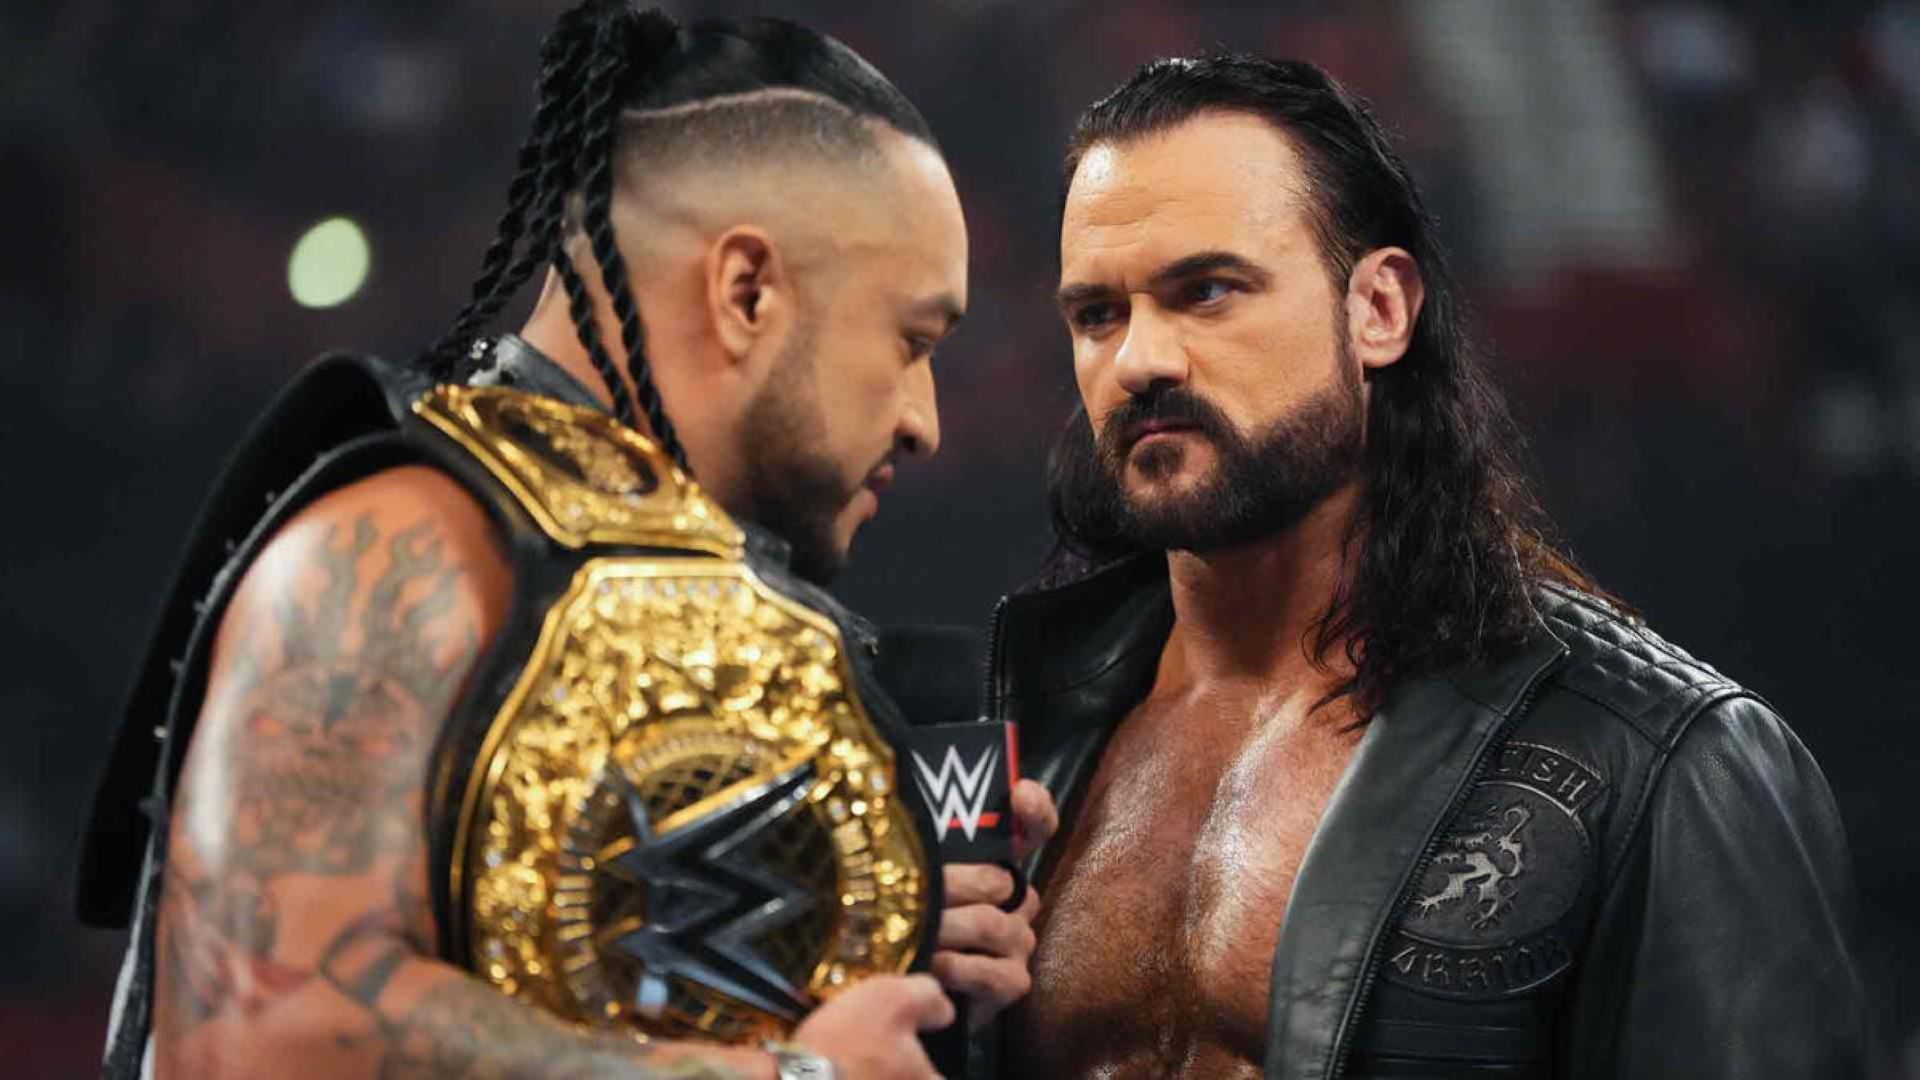 Drew McIntyre has his sights set on the World Heavyweight title - and CM Punk.